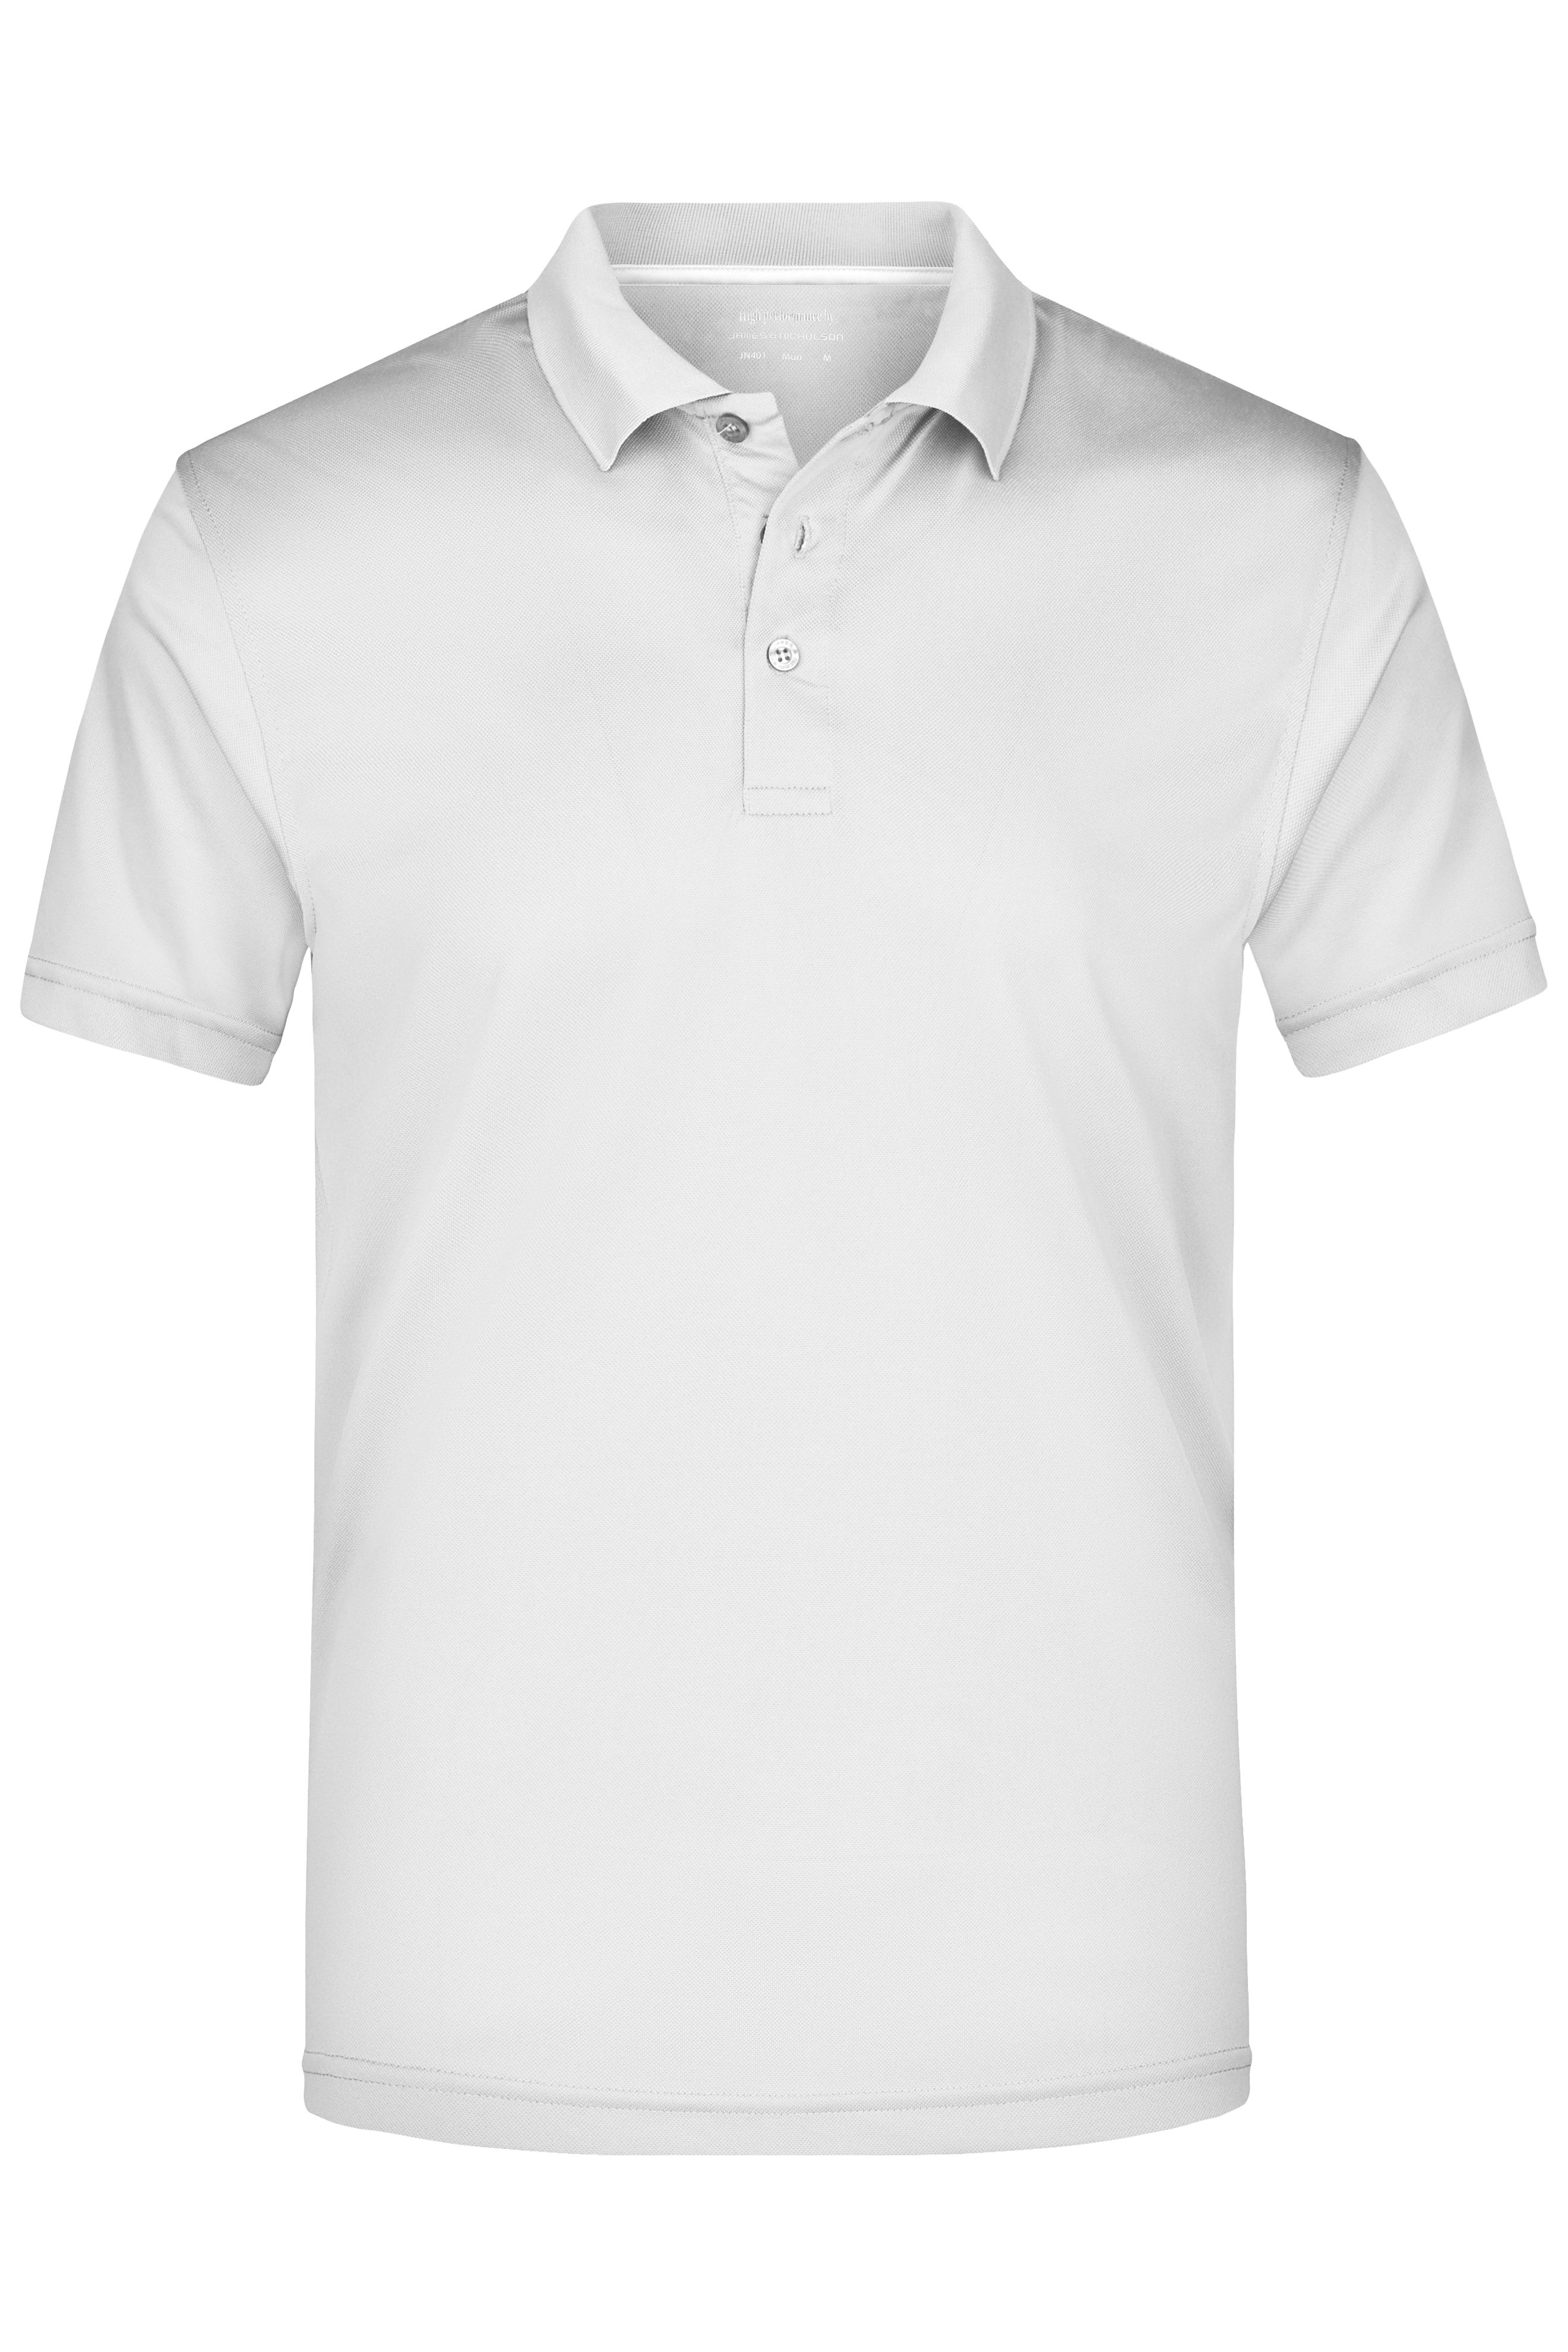 Men's Polo High Performance JN401 Funktionspolo